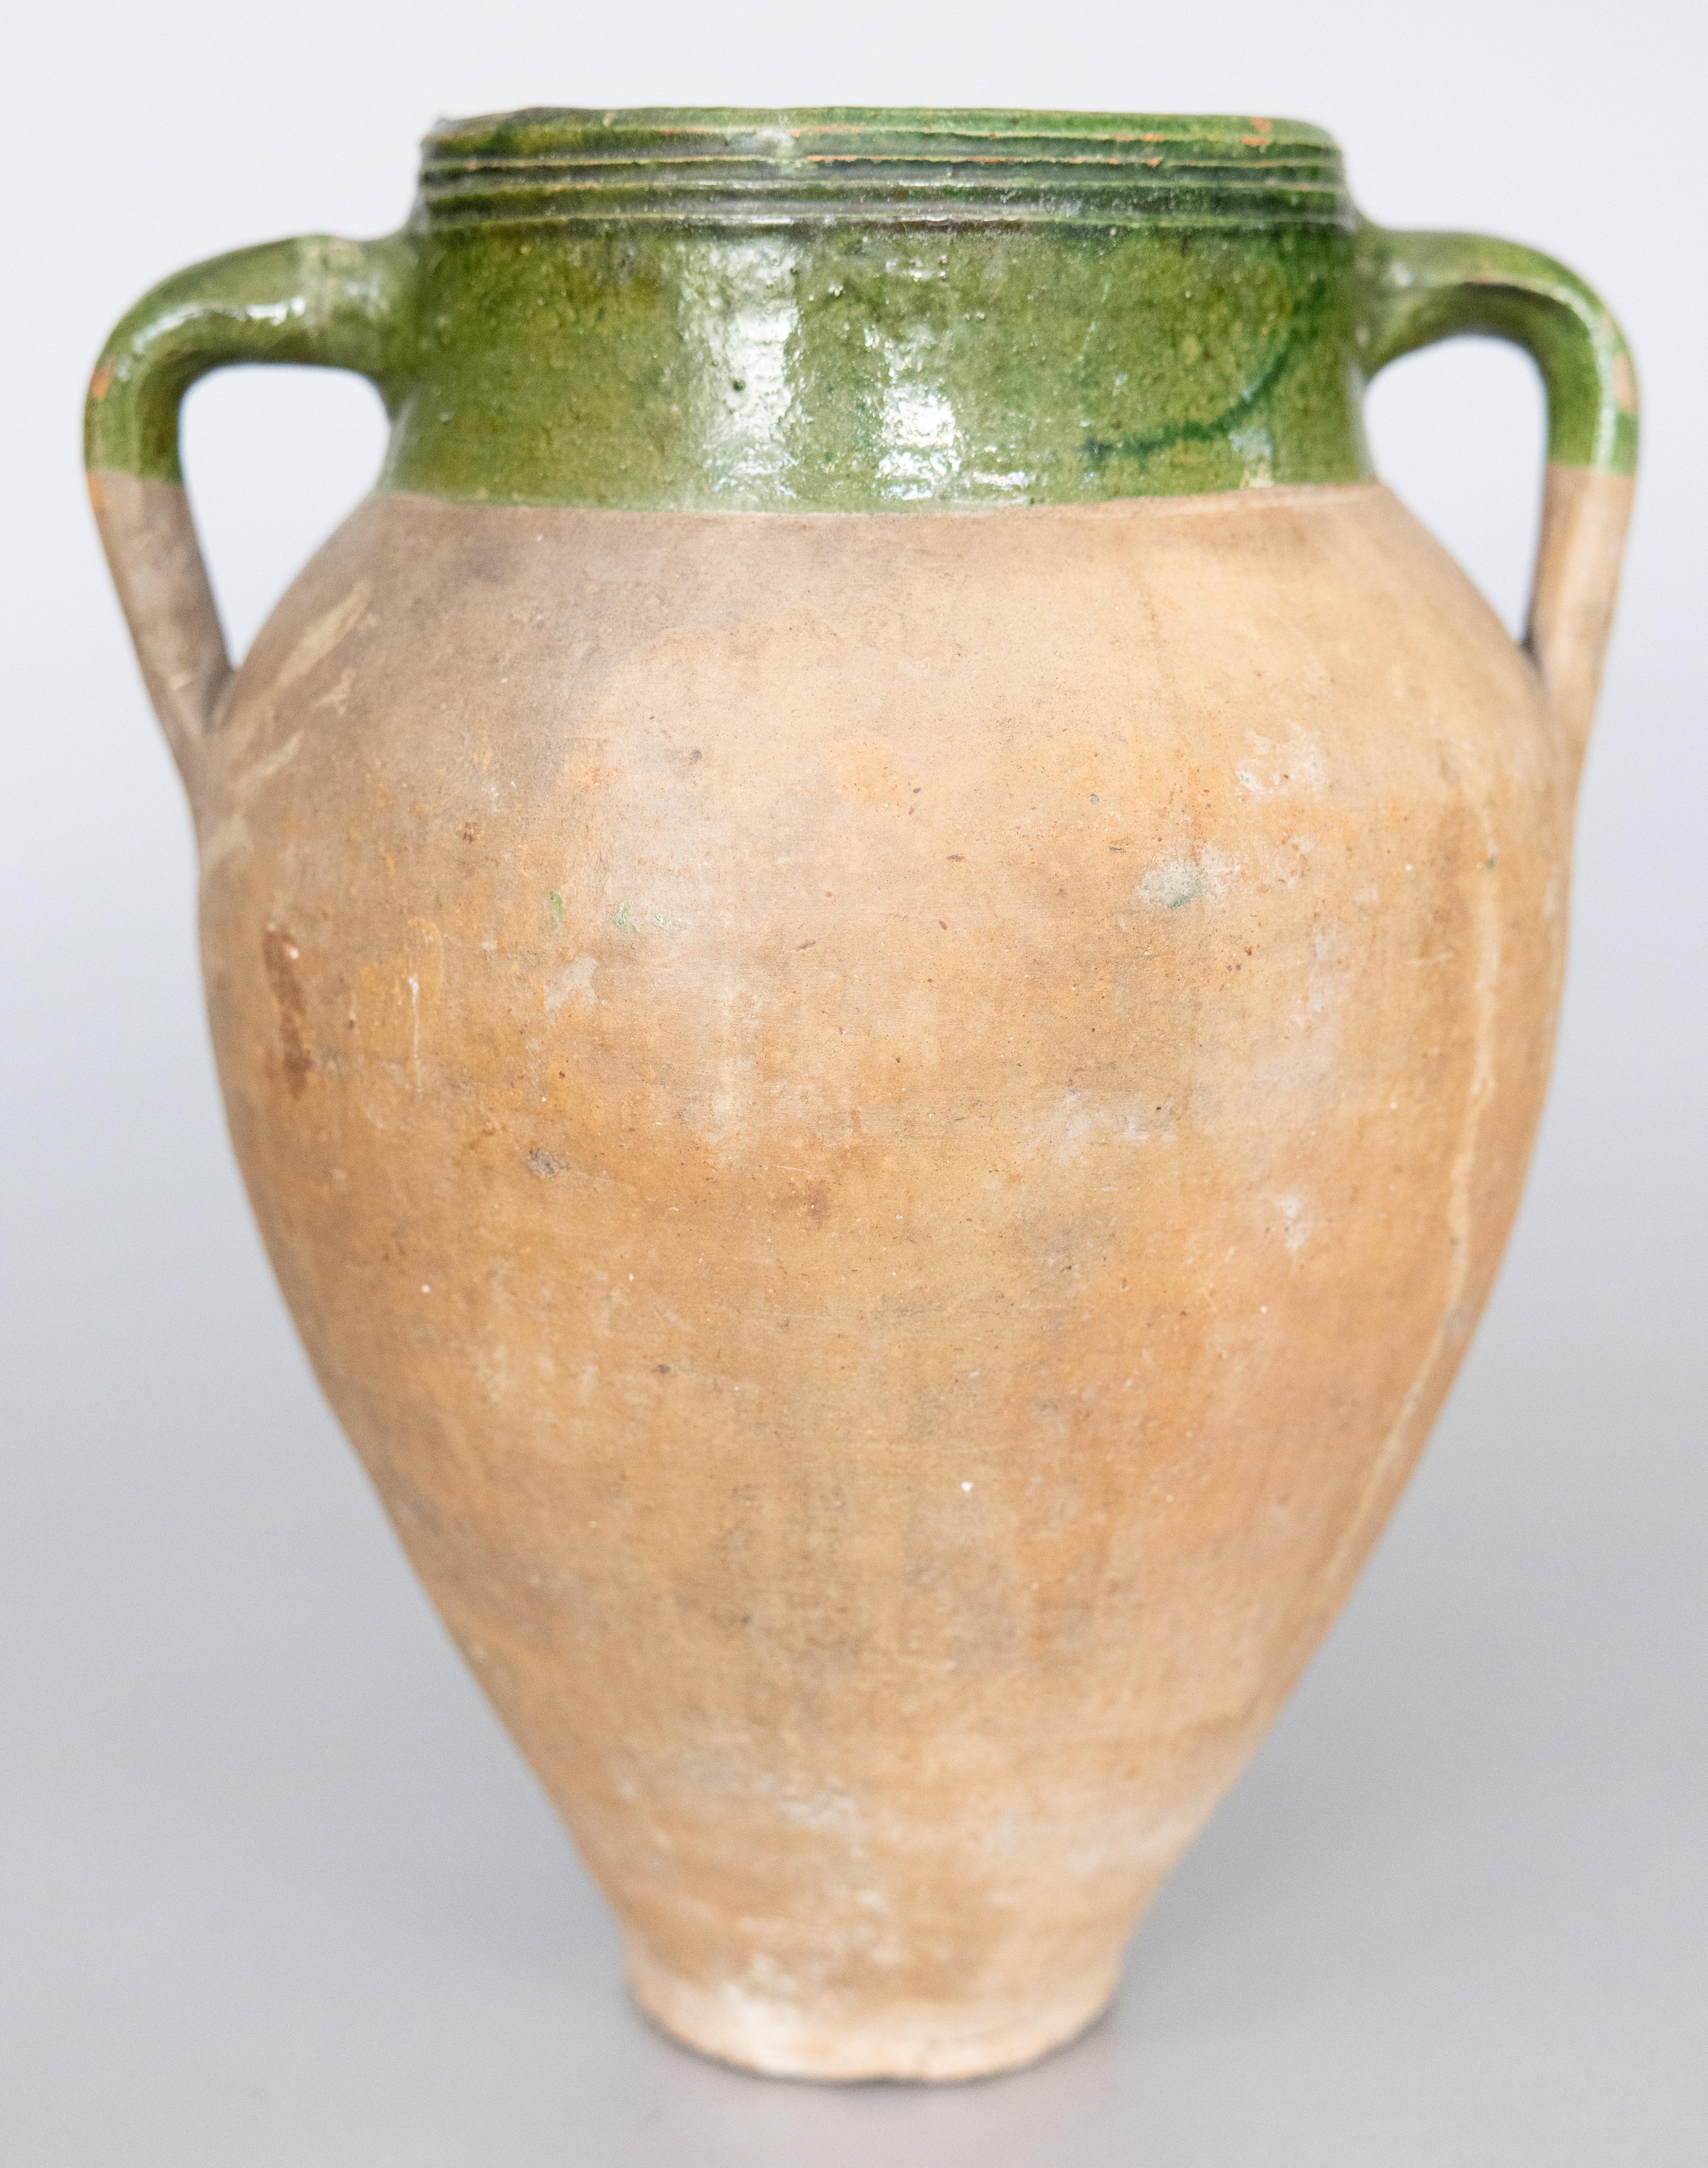 19th Century French Green Glazed Terracotta Olive Jar Urn Vase In Good Condition For Sale In Pearland, TX